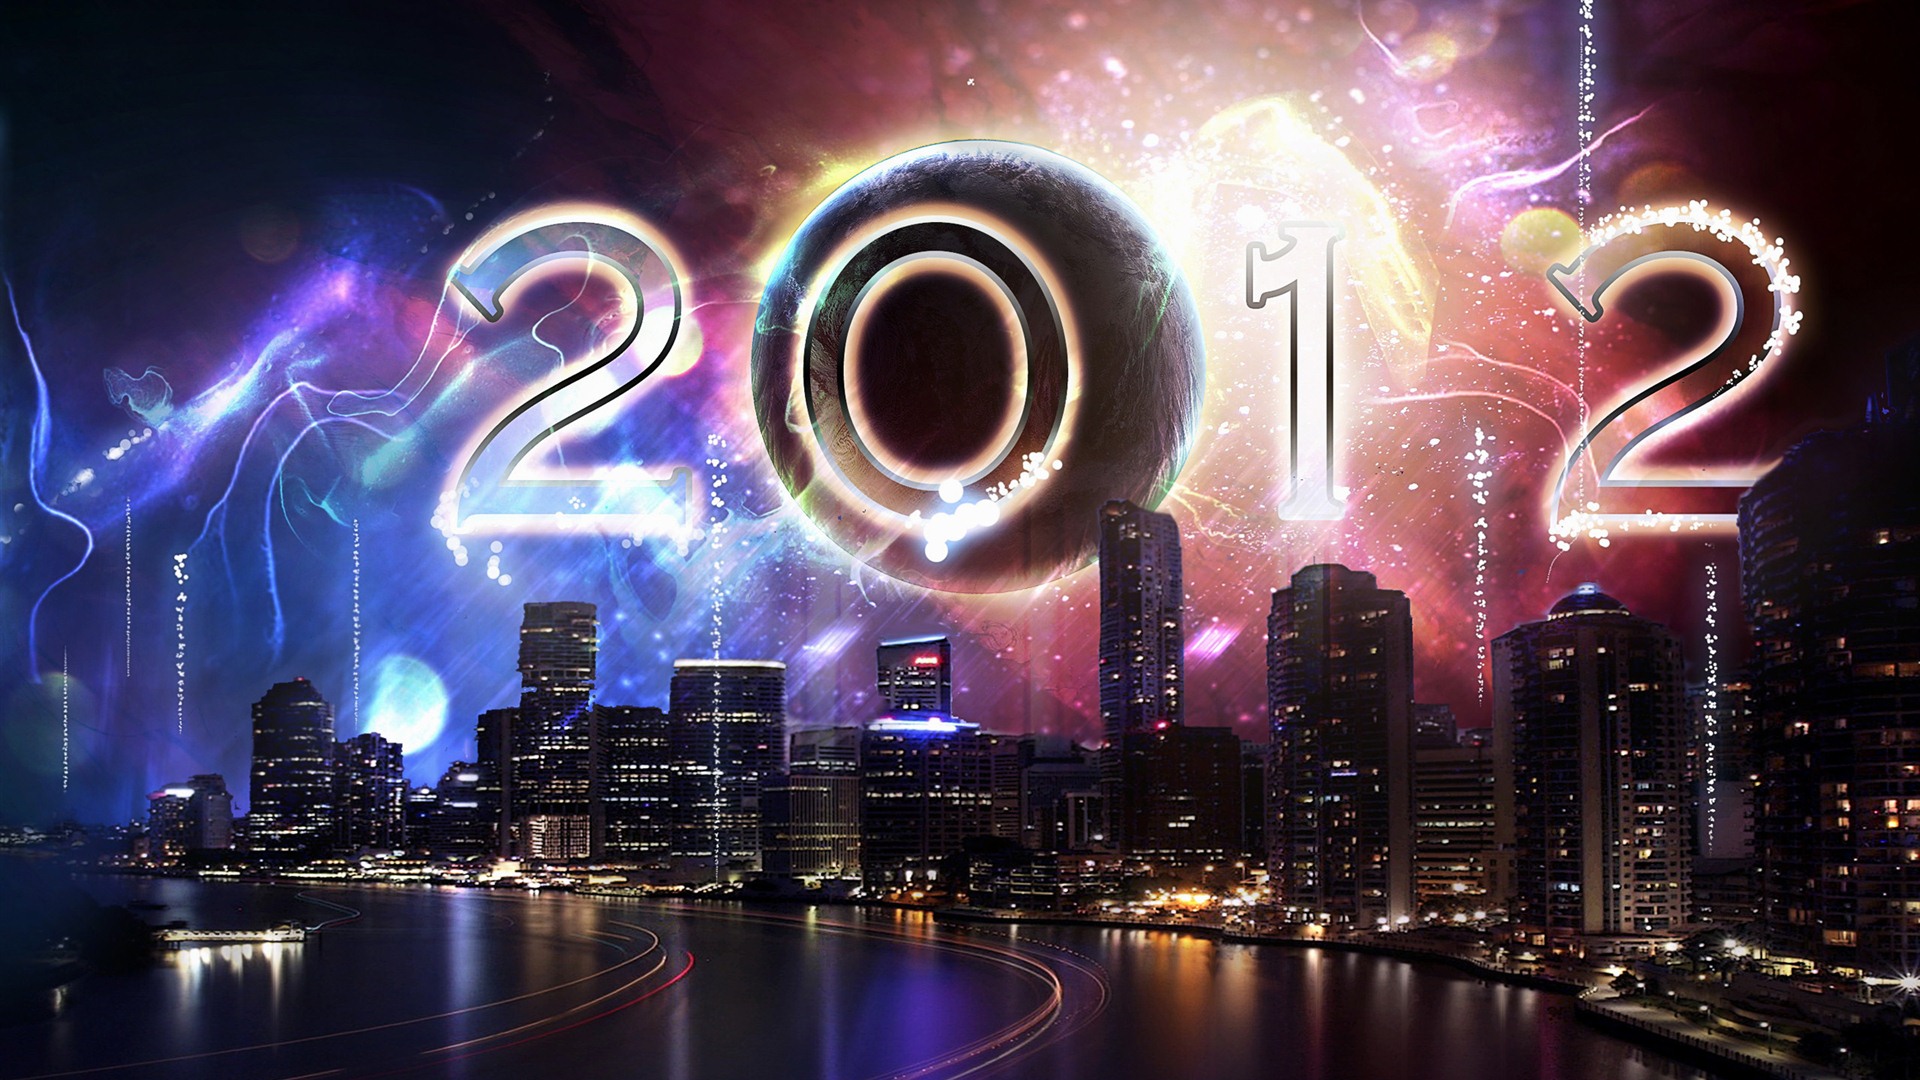 2012 New Year wallpapers (1) #1 - 1920x1080